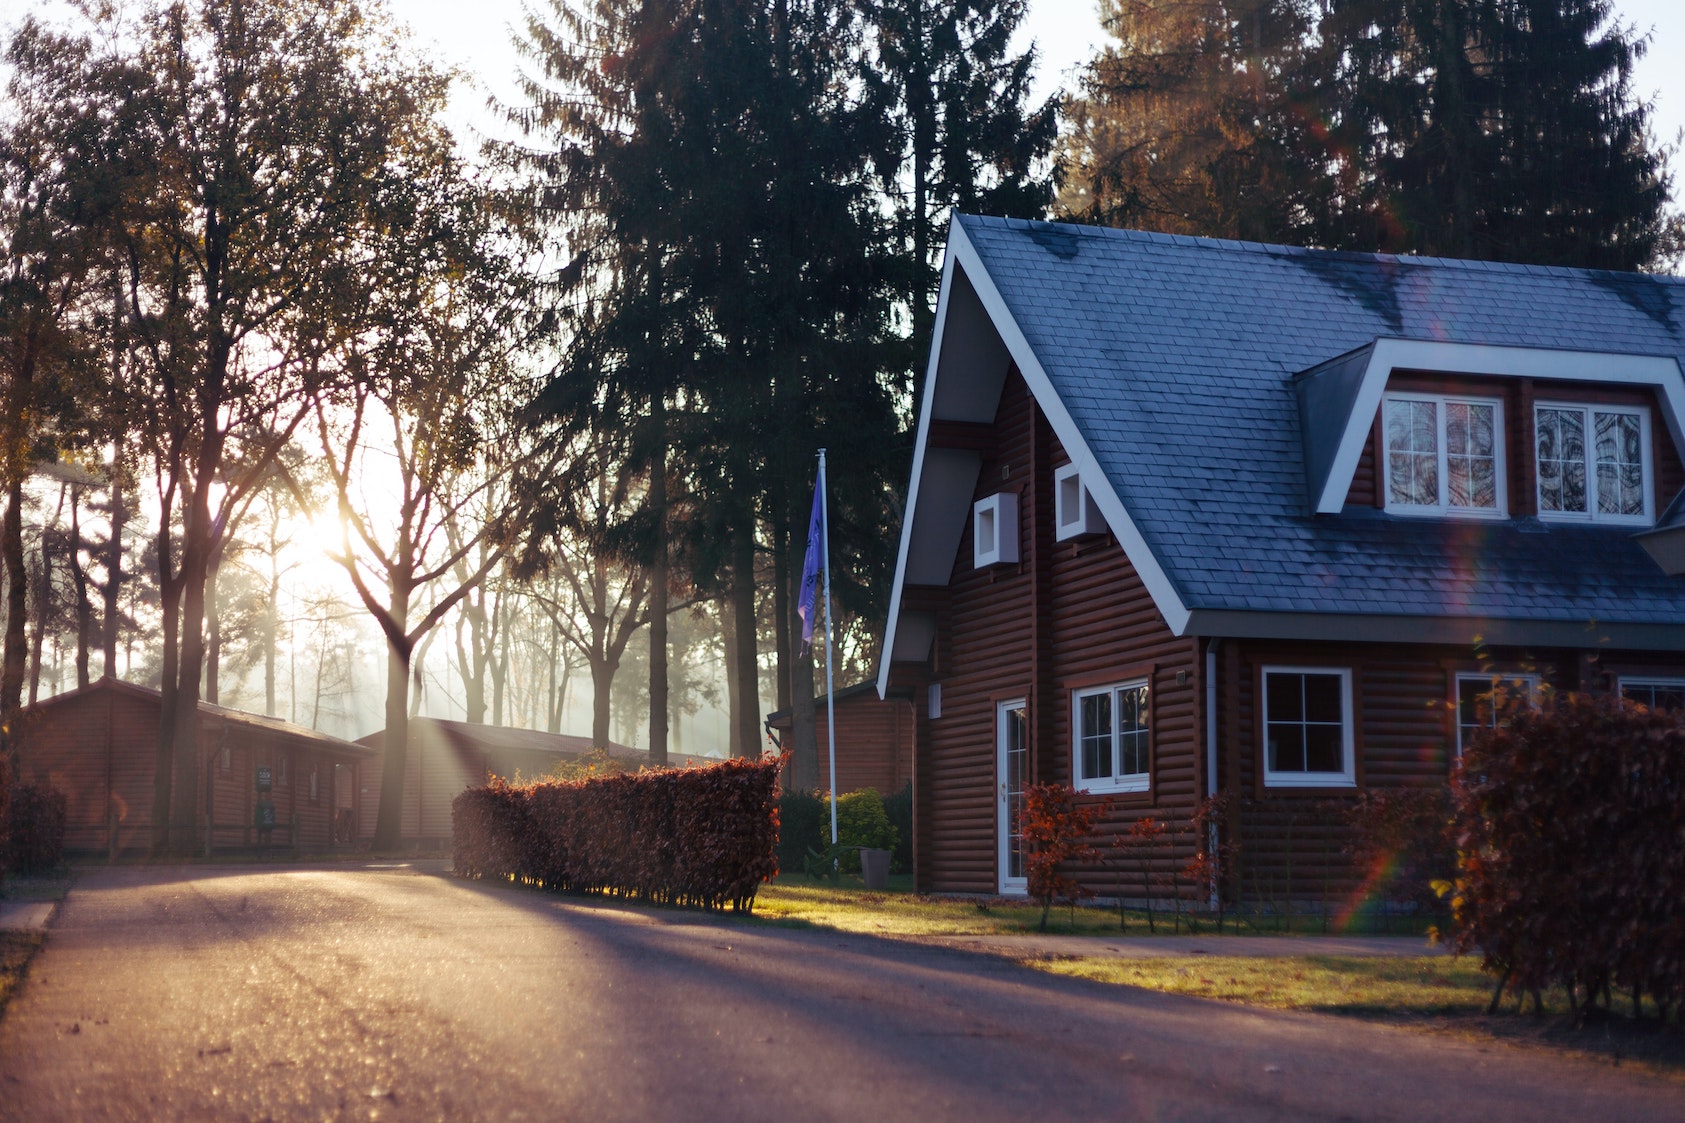 Looking For Home Insurance? Here Are Some Helpful Tips